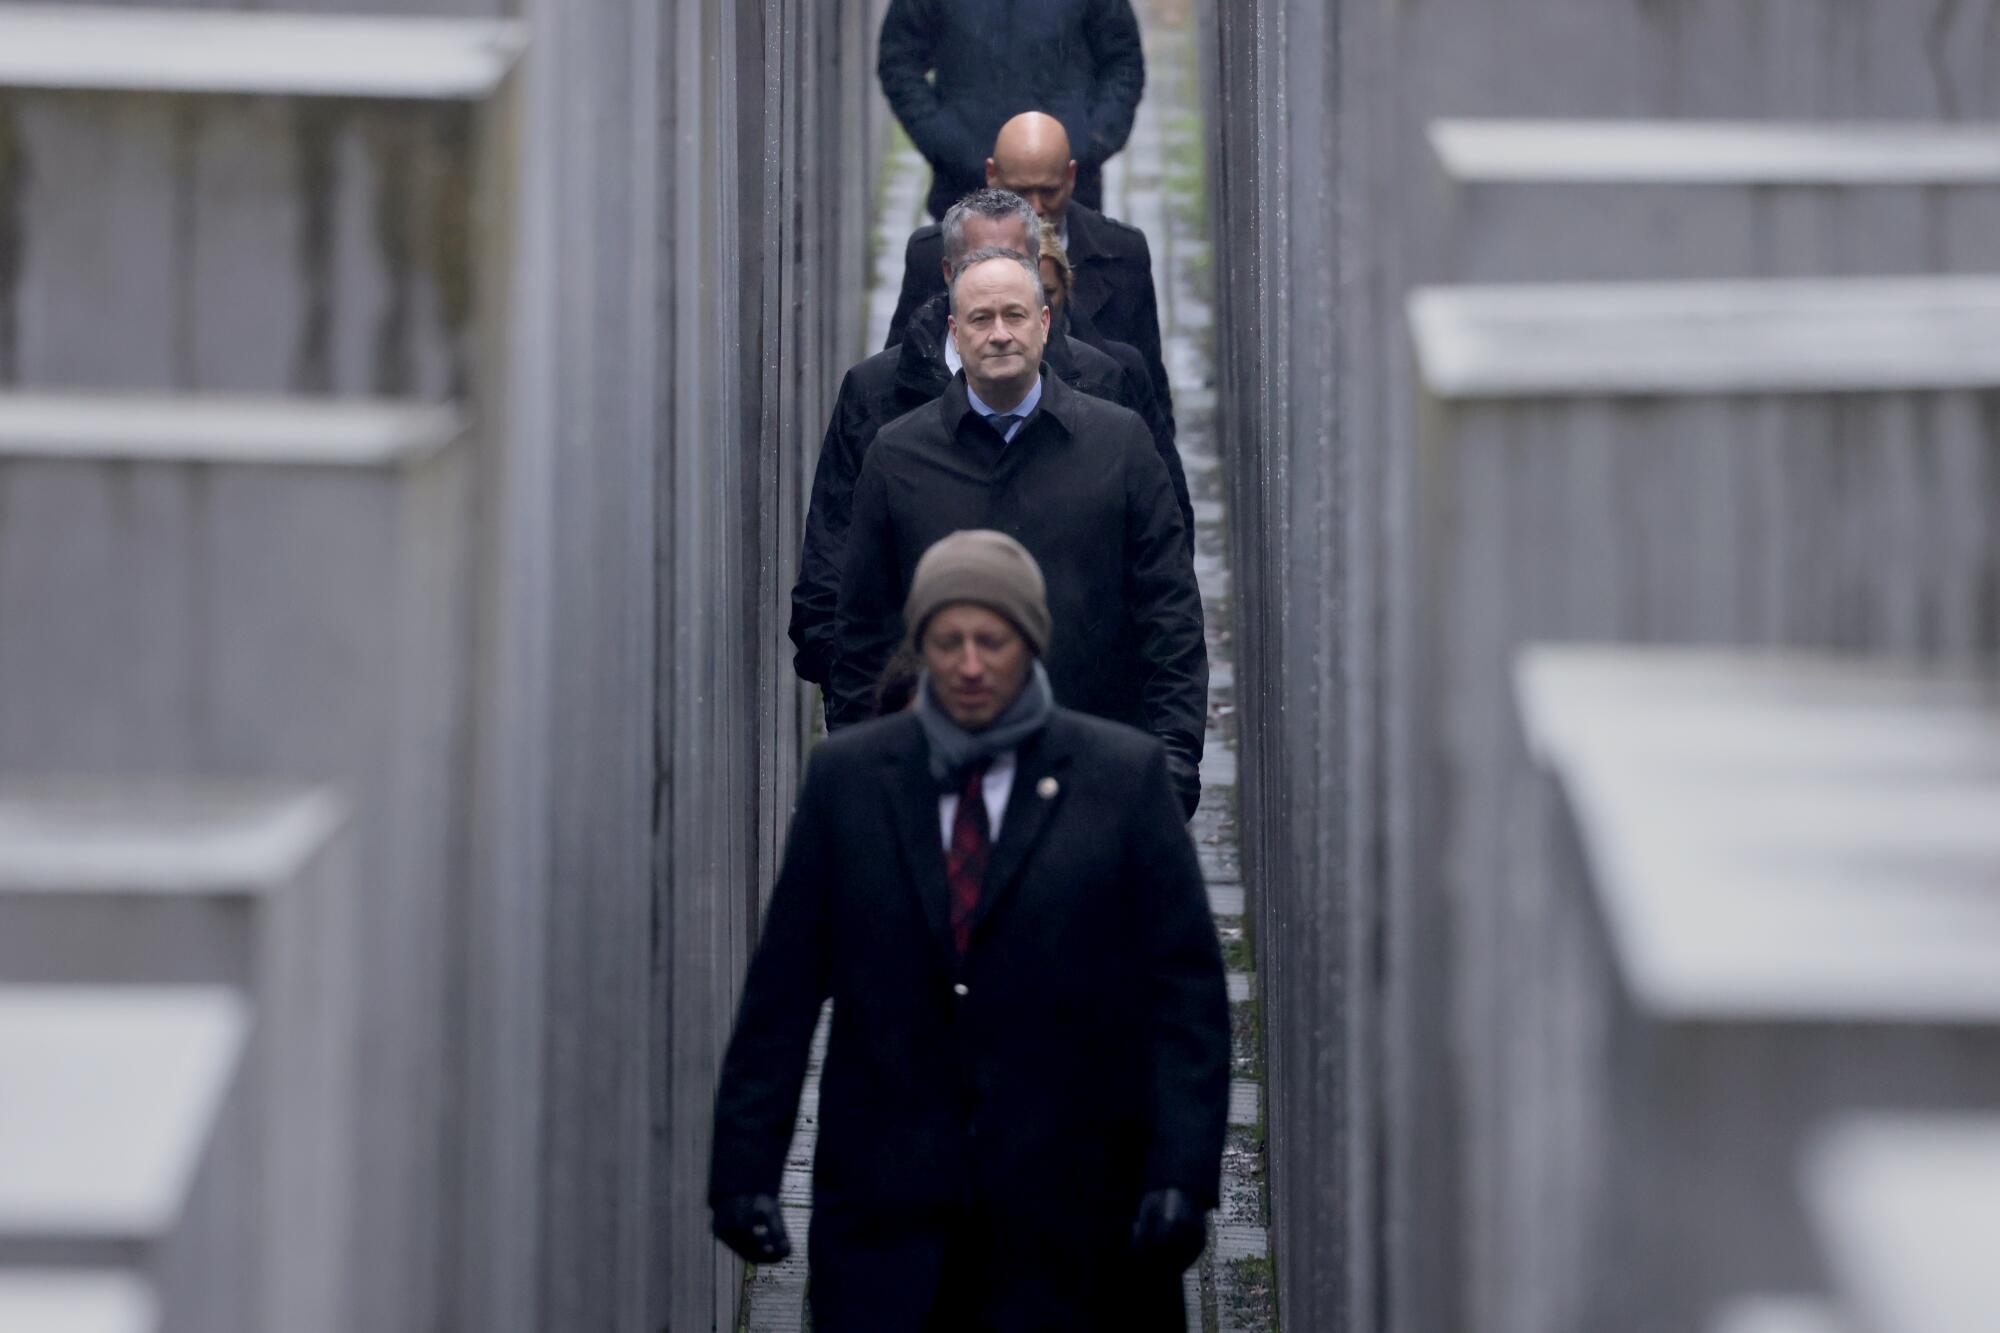 Douglas Emhoff, flanked by security, walks among concrete blocks of a memorial